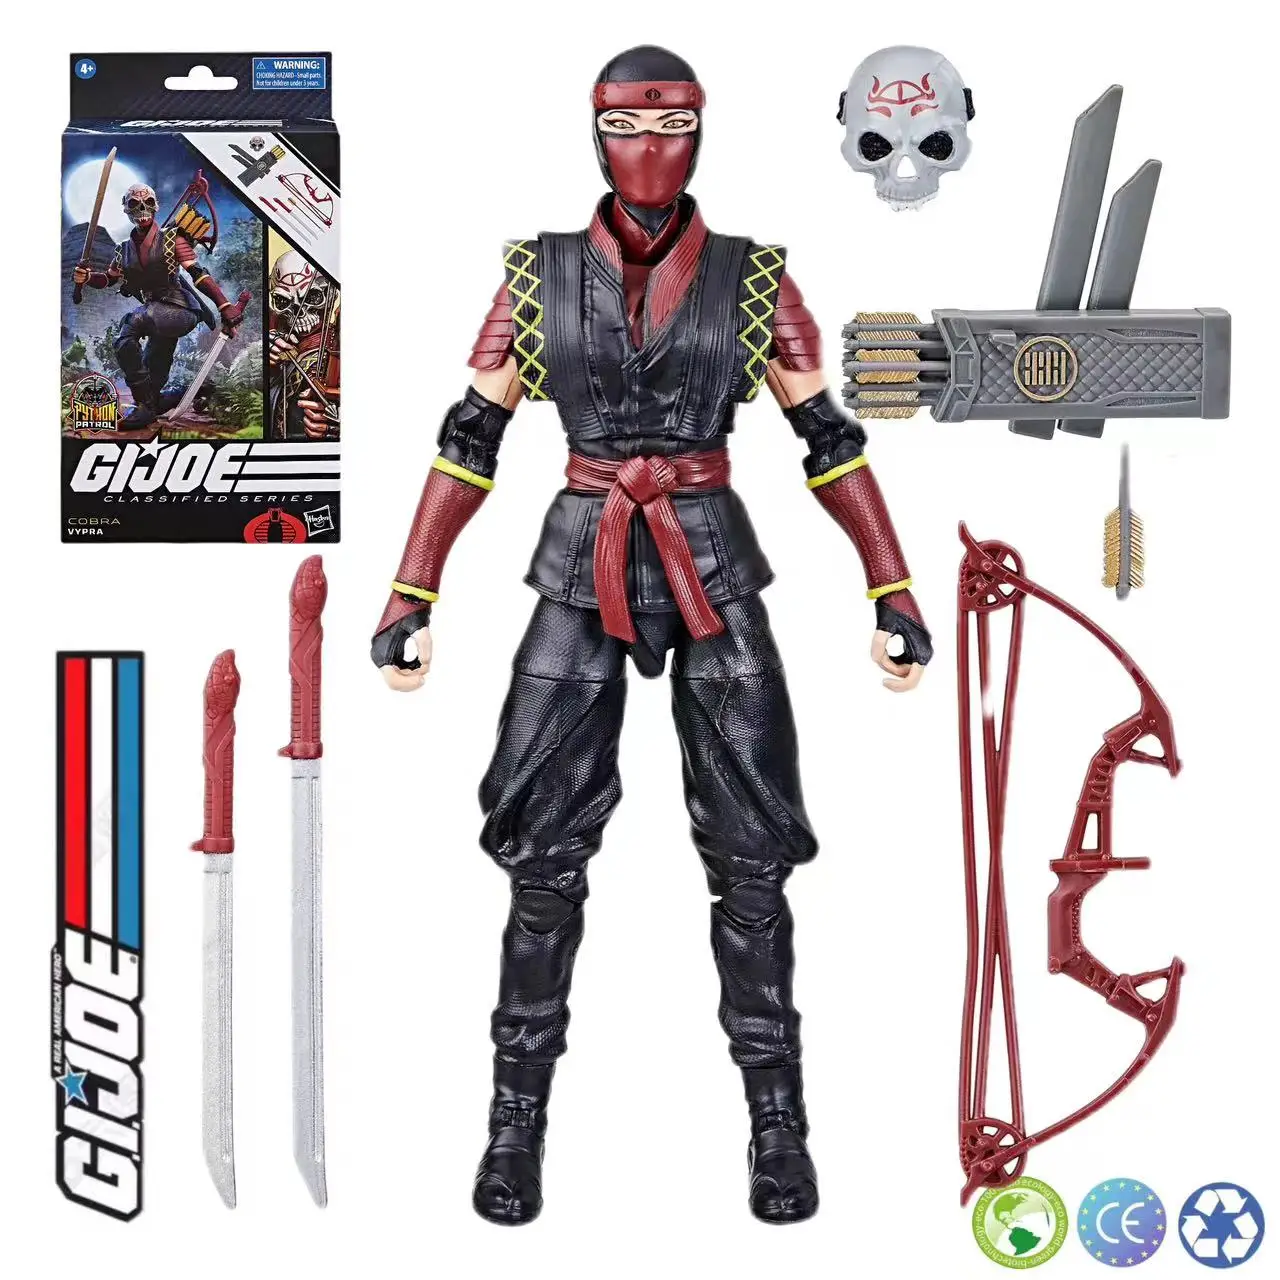 

Hasbro G.i. Joe Classified Series Python Patrol Vypra, 88 Action Figures Toy Model Gift Collectibles 6 Inch Original New